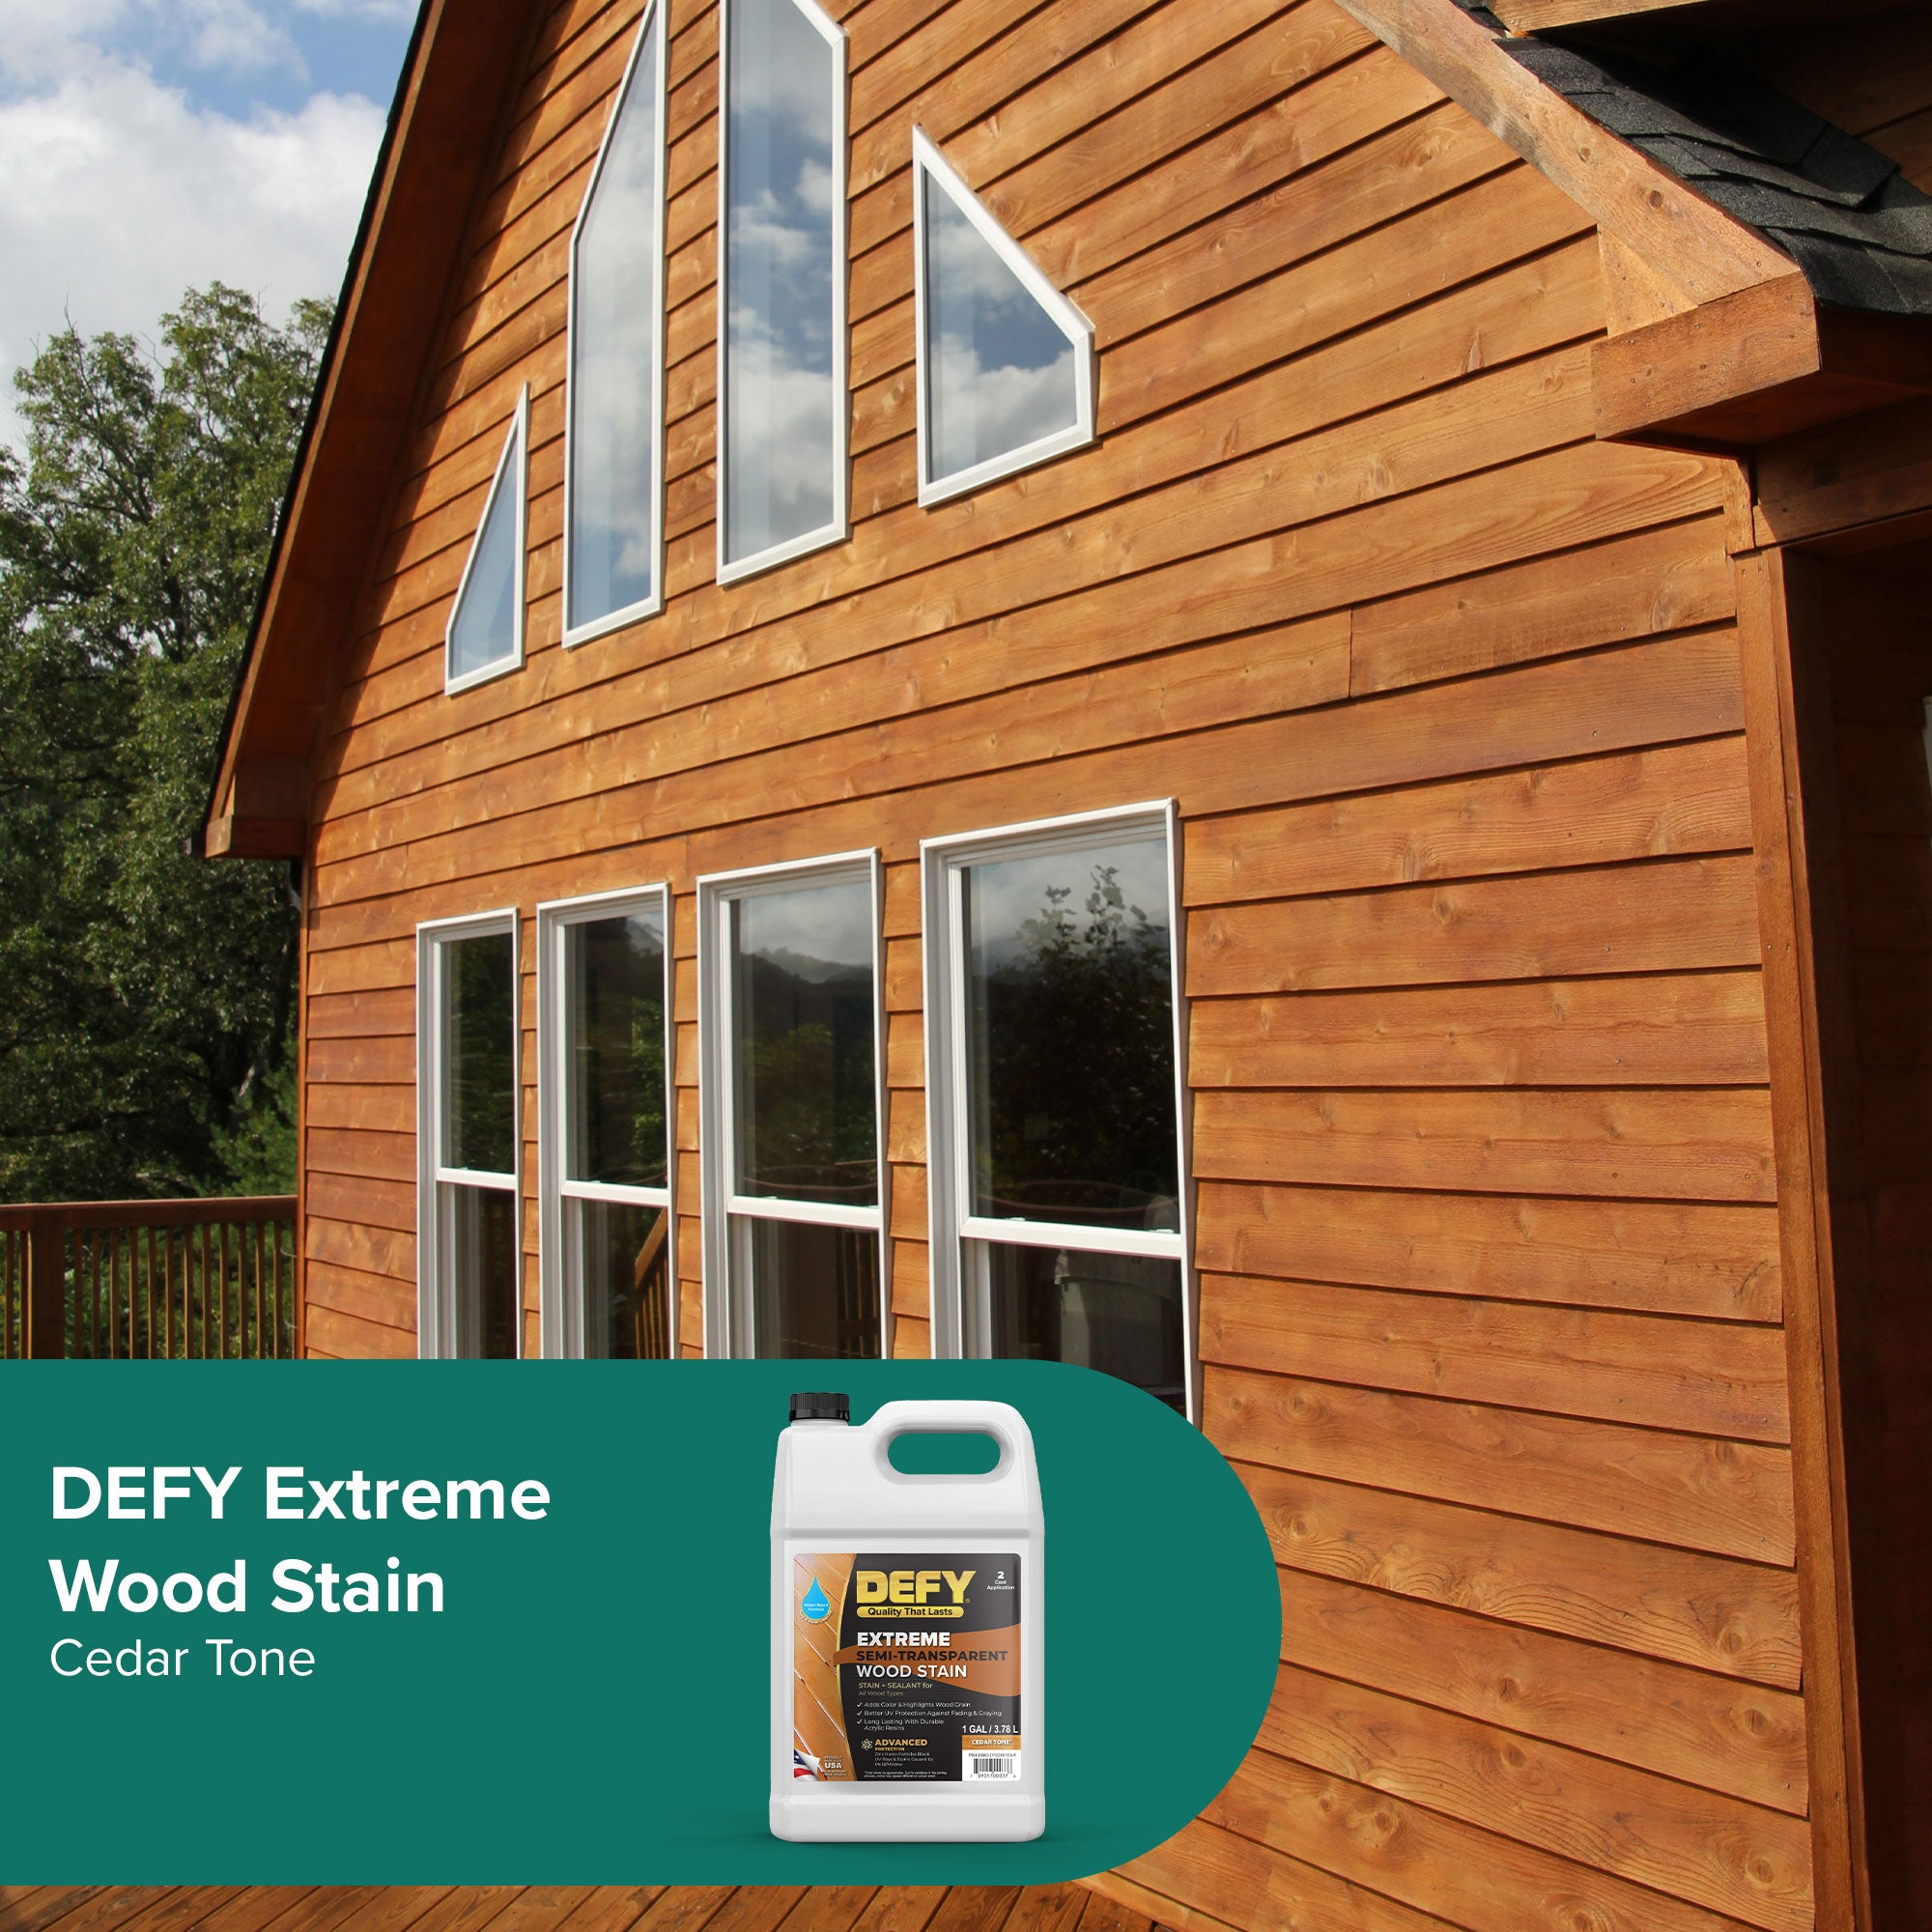 DEFY Extreme 1 Gallon Semi-Transparent Exterior Wood Stain, Cedar Tone -  Household Wood Stains 